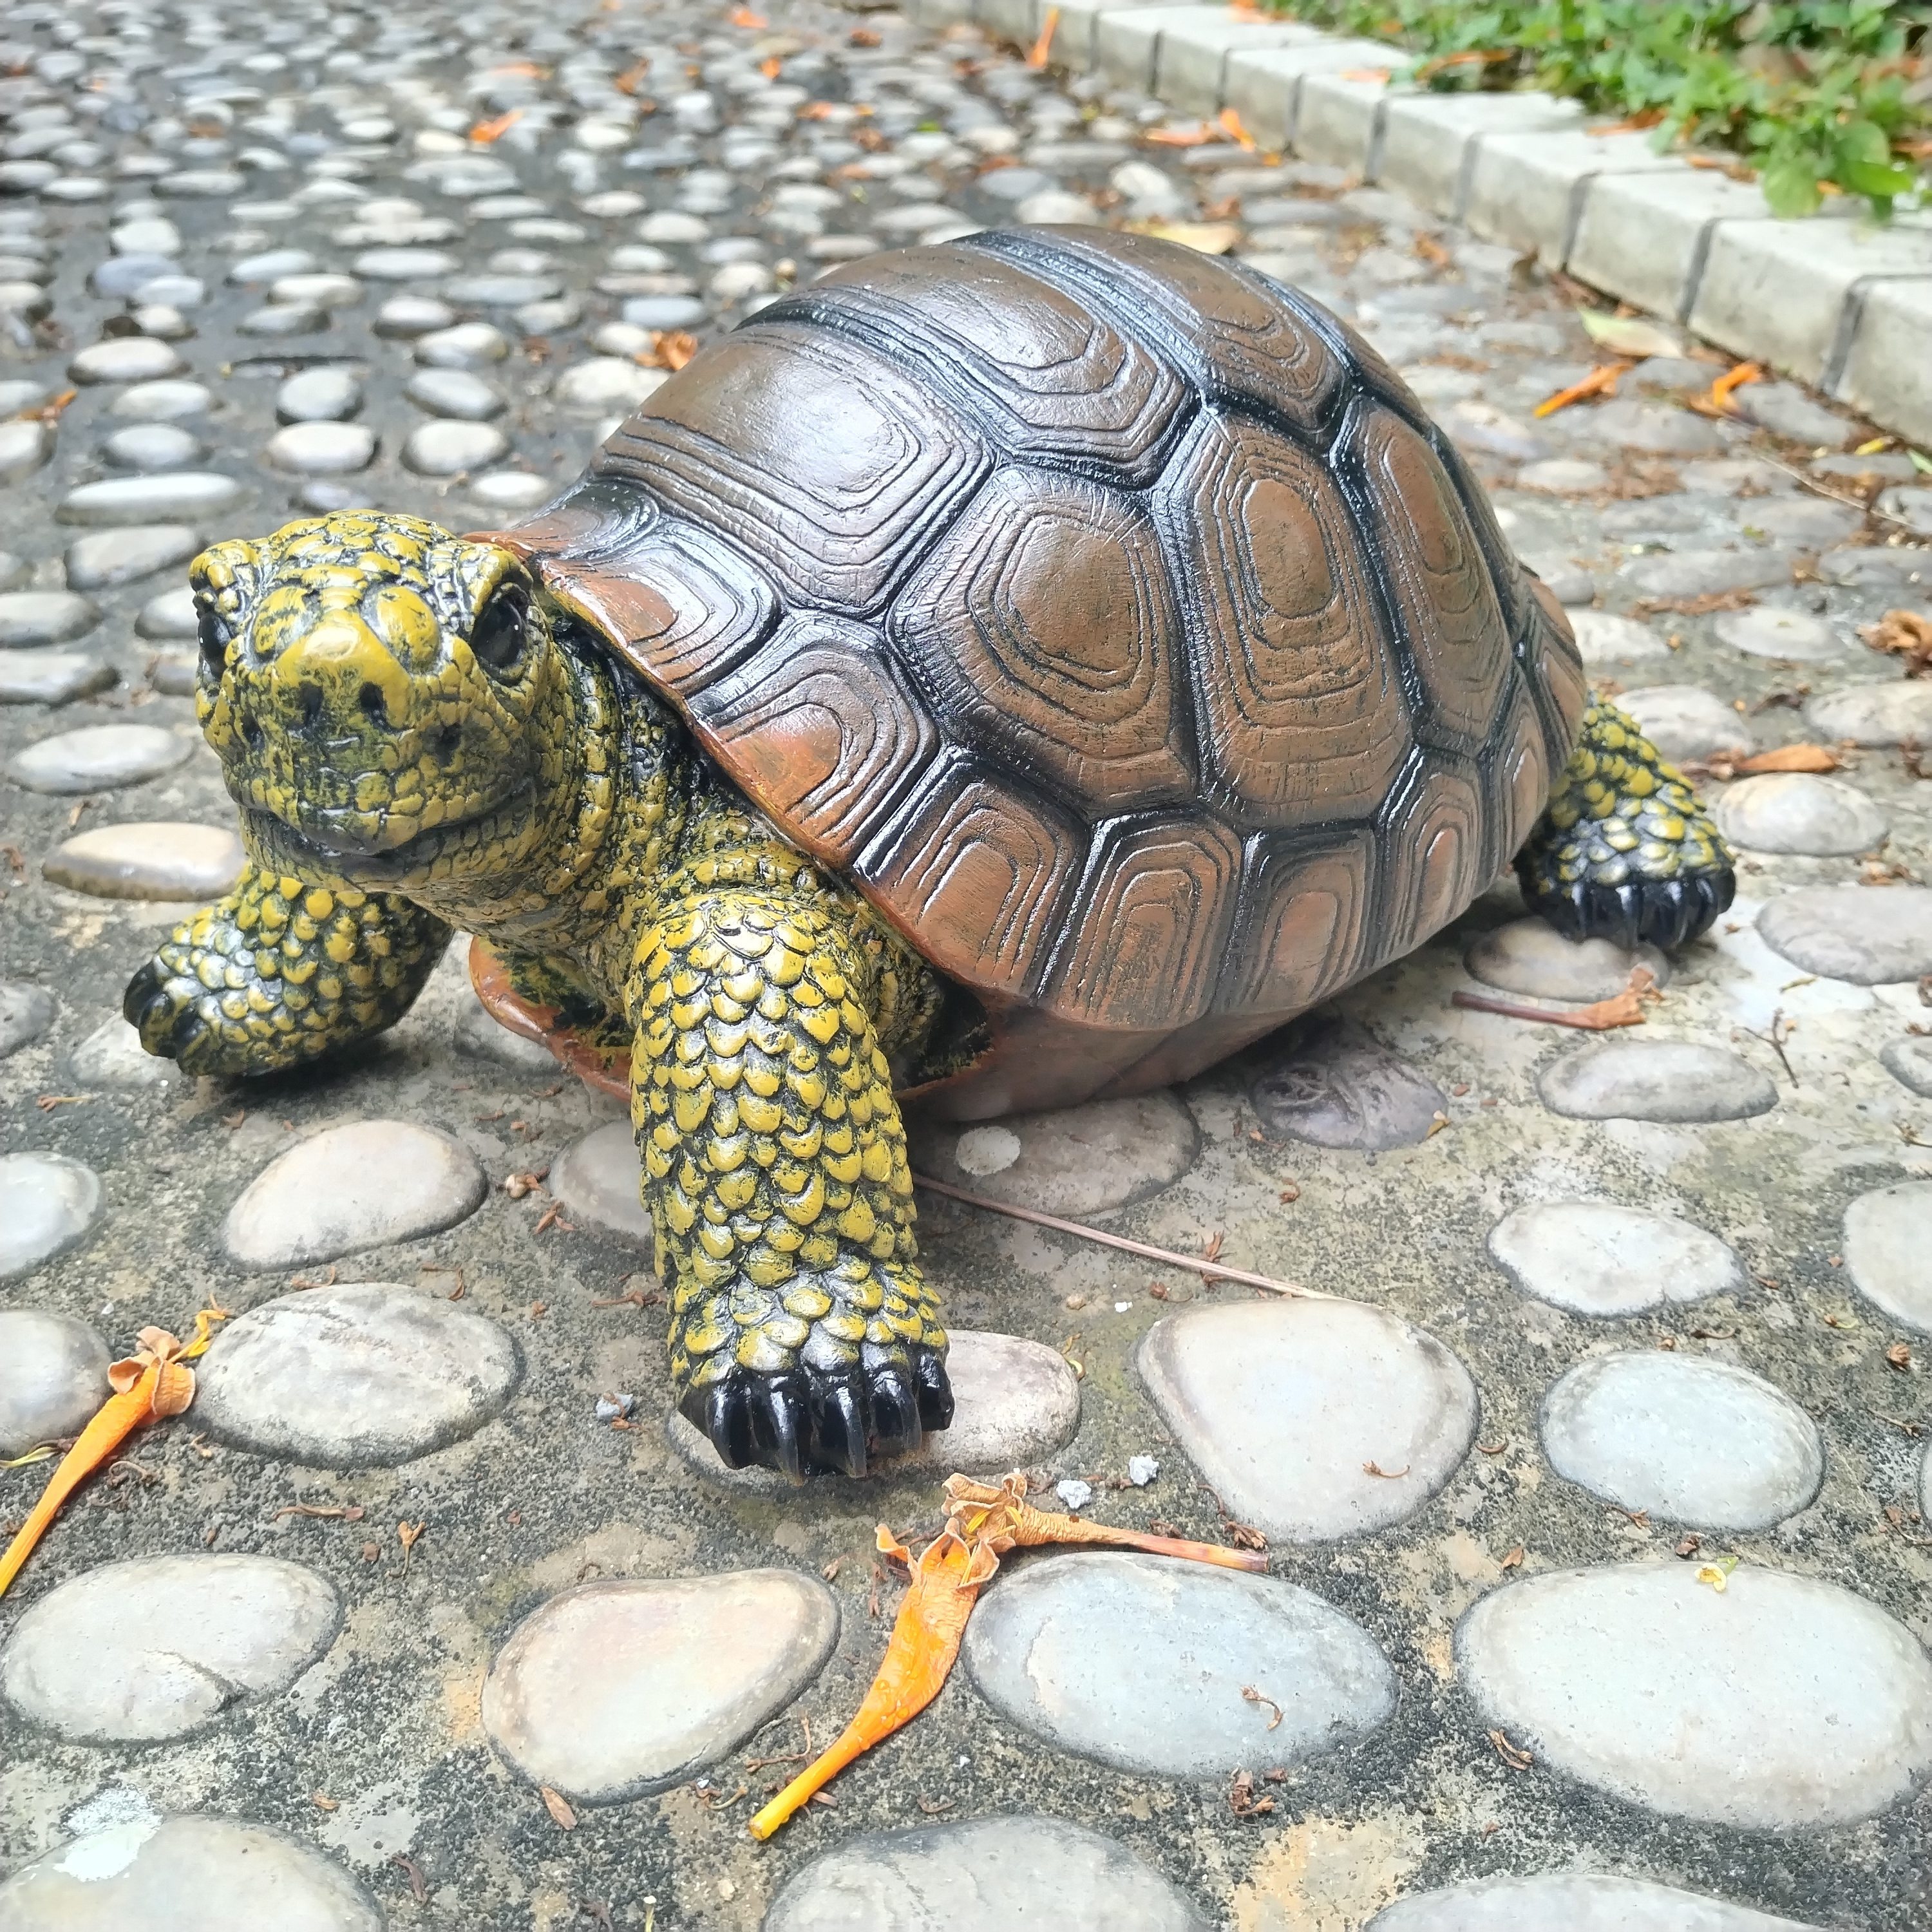 

1pcp Lifelike Resin Turtle Figurine, Classic Style, Home & Garden Decor, Indoor/outdoor Statue For Yard Lawn Balcony Home Decor, Housewarming Gift